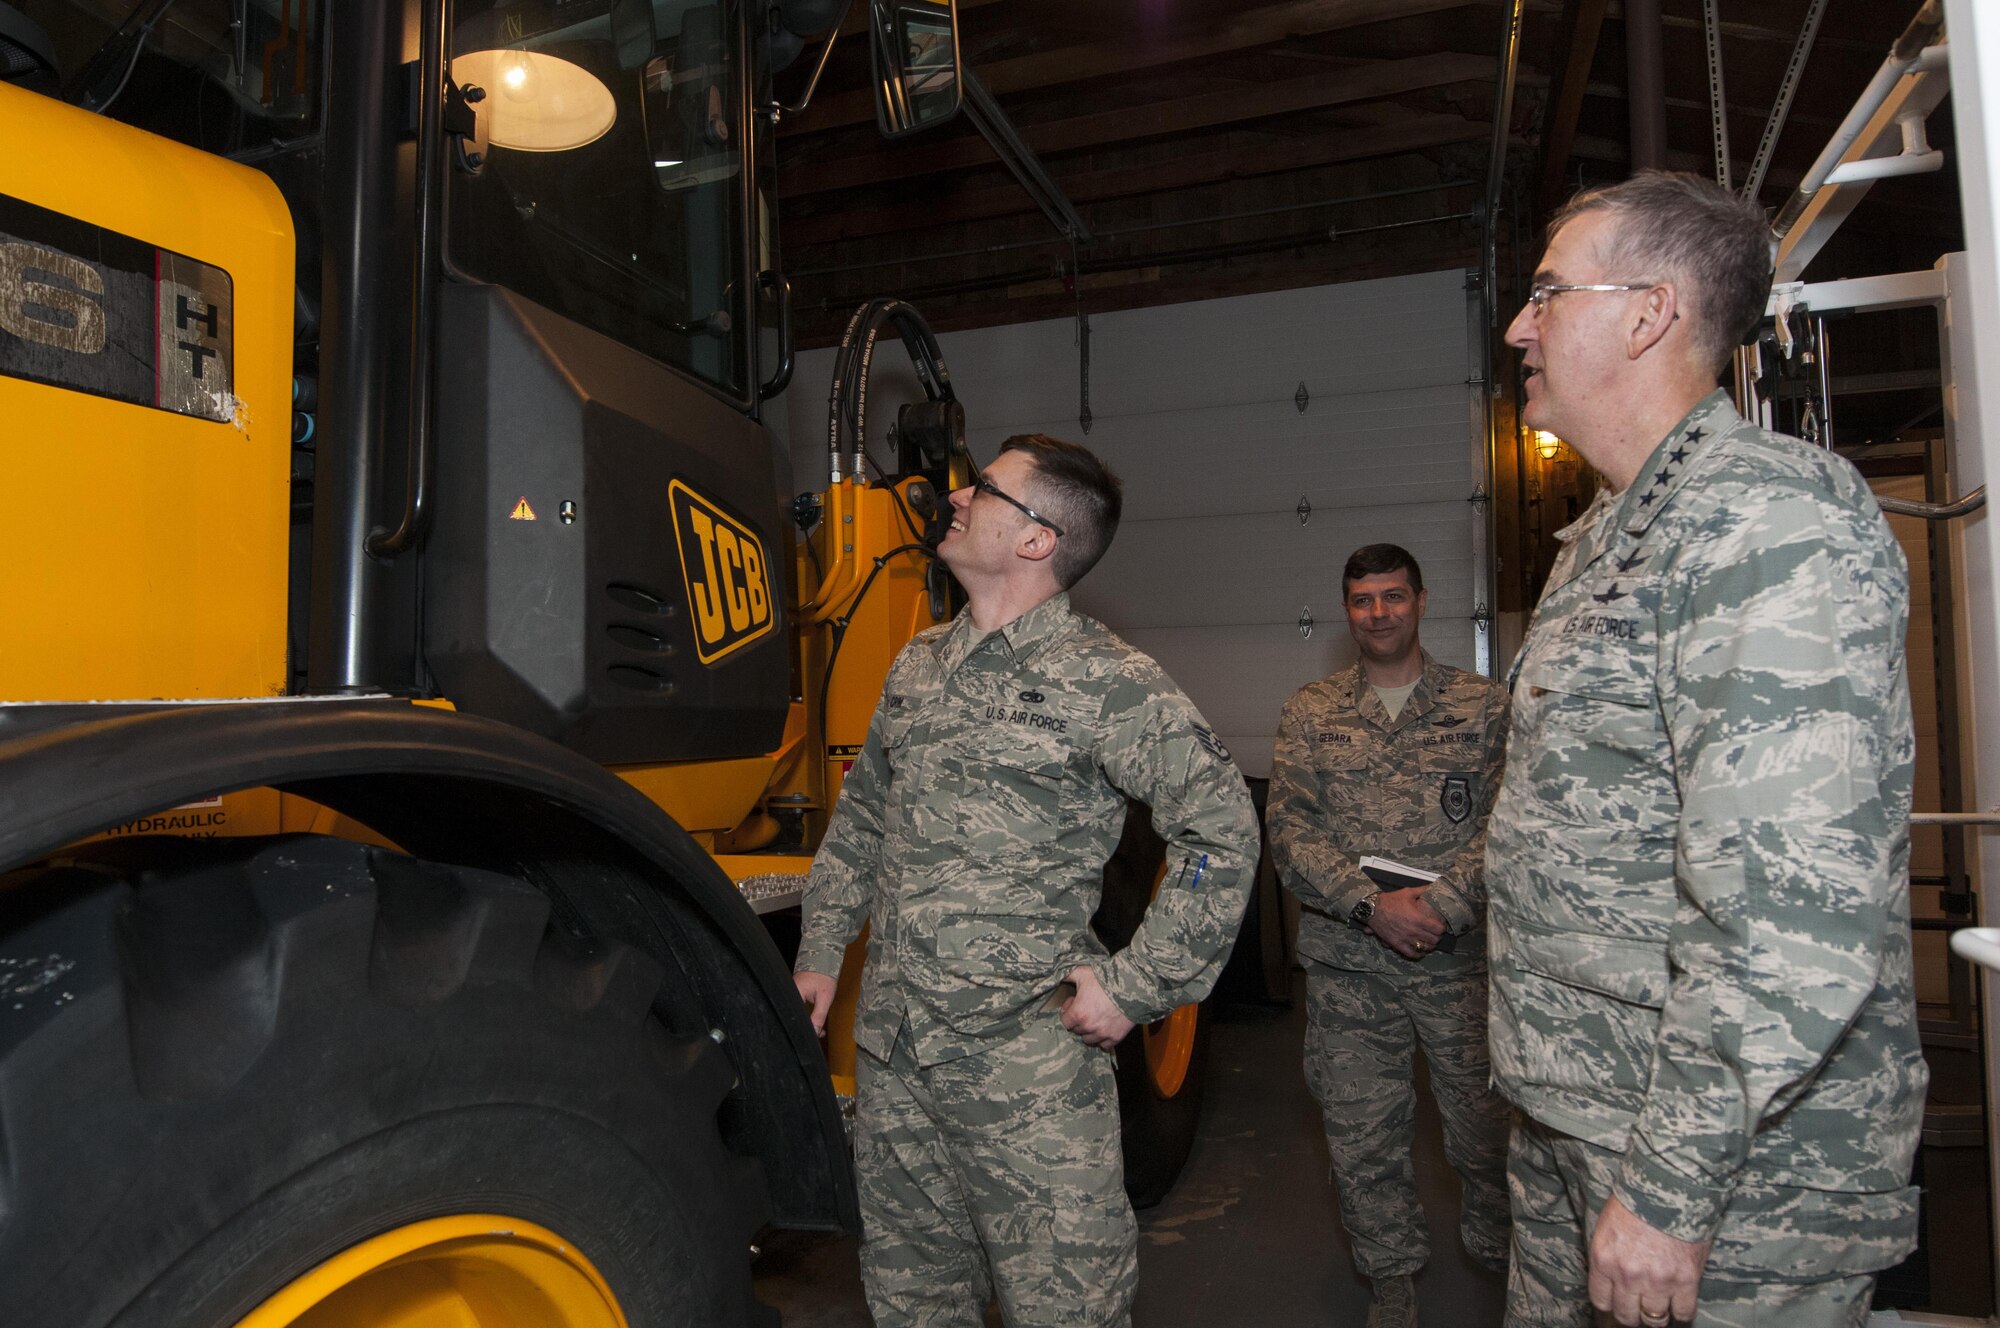 Staff Sgt. Corey Crim, 319th Missile Squadron missile alert facility manager, tours a MAF with U.S. Air Force Gen. John E. Hyten, U.S. Strategic Command commander, during a familiarization visit of the F.E. Warren Air Force Base missile complex, Feb. 22, 2017. The facility manager is in charge of maintaining the MAF and managing personnel who reside inside. This was Hyten’s first visit to the 90th Missile Wing as USSTRATCOM commander. (U.S. Air Force photo by Staff Sgt. Christopher Ruano)